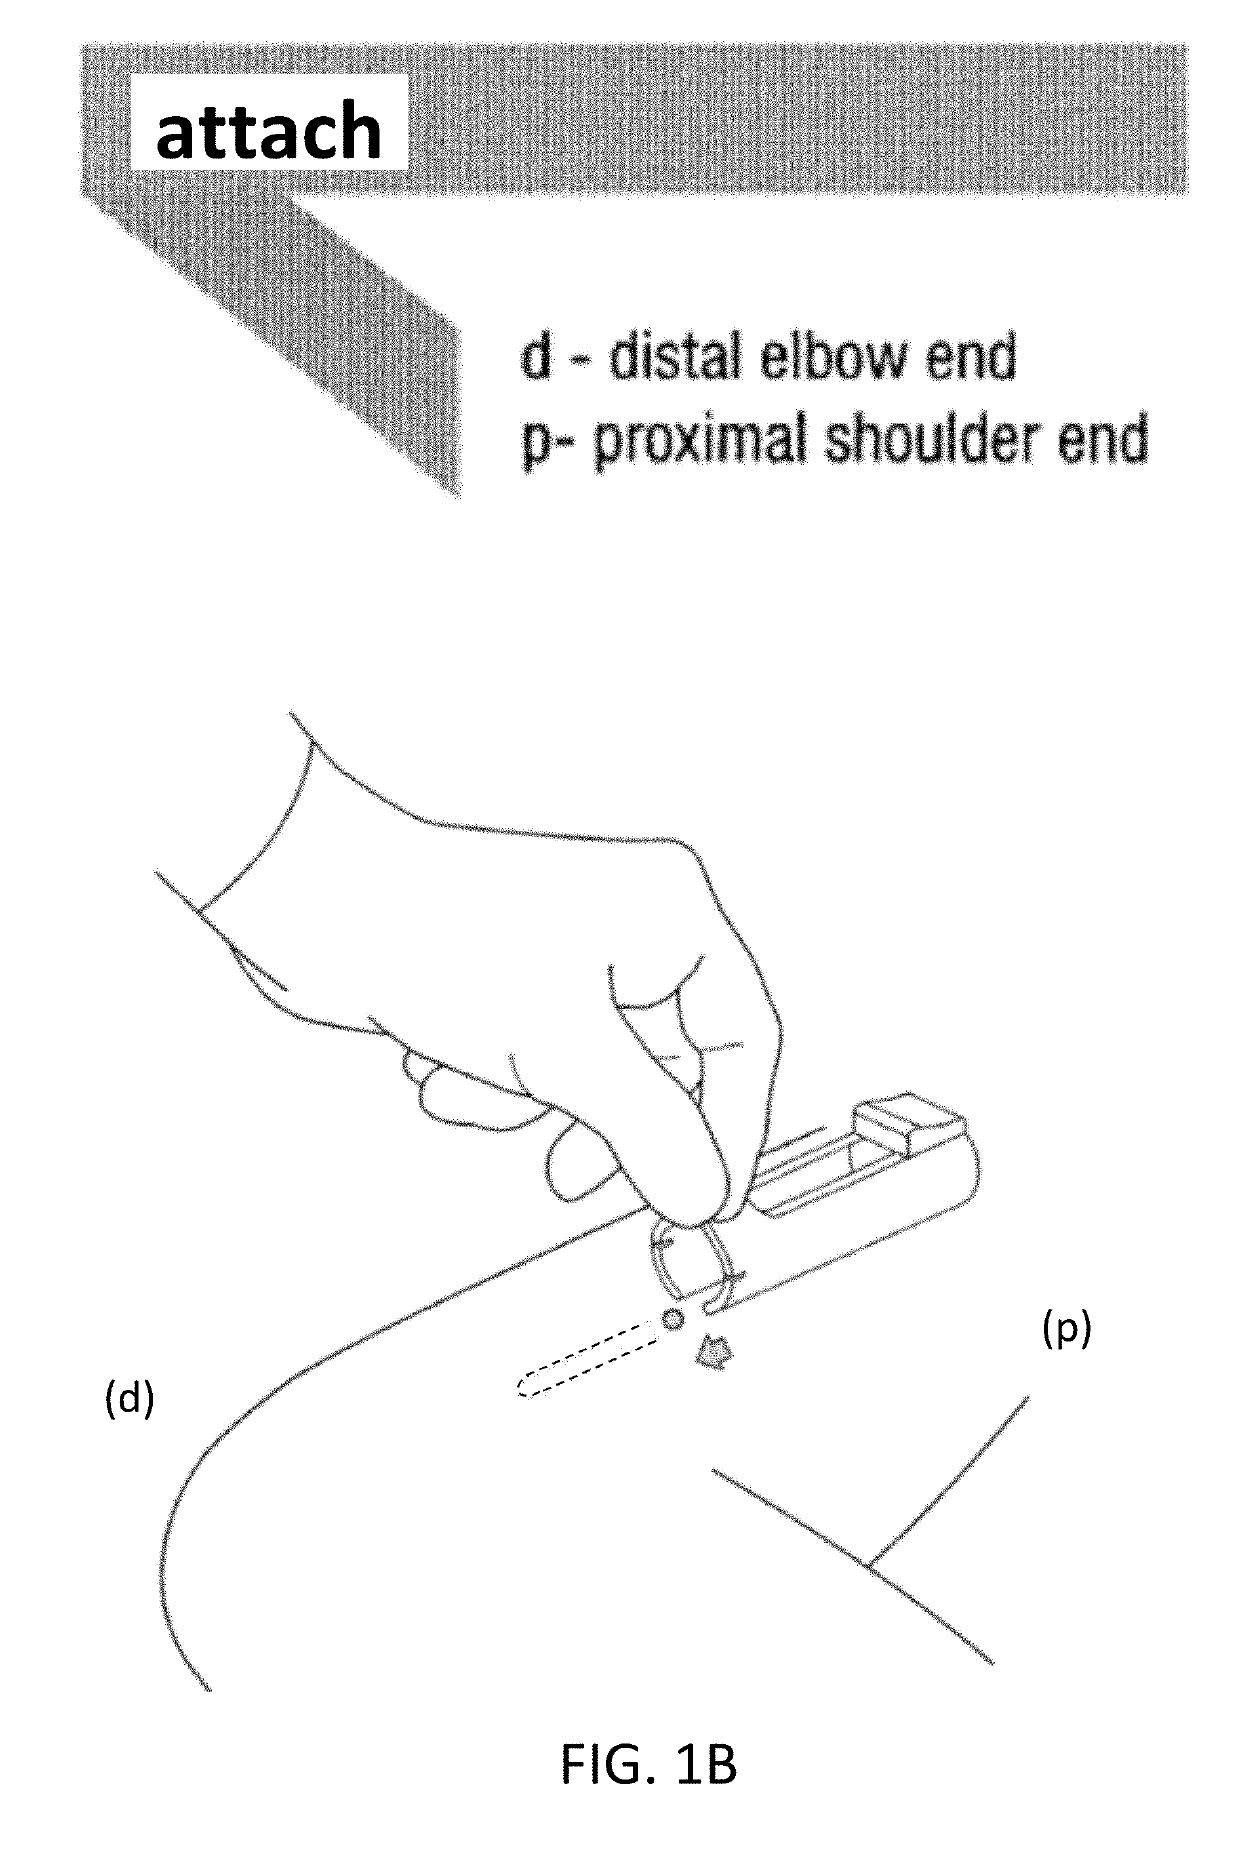 Device for Removing an Item Implanted Underneath the Skin